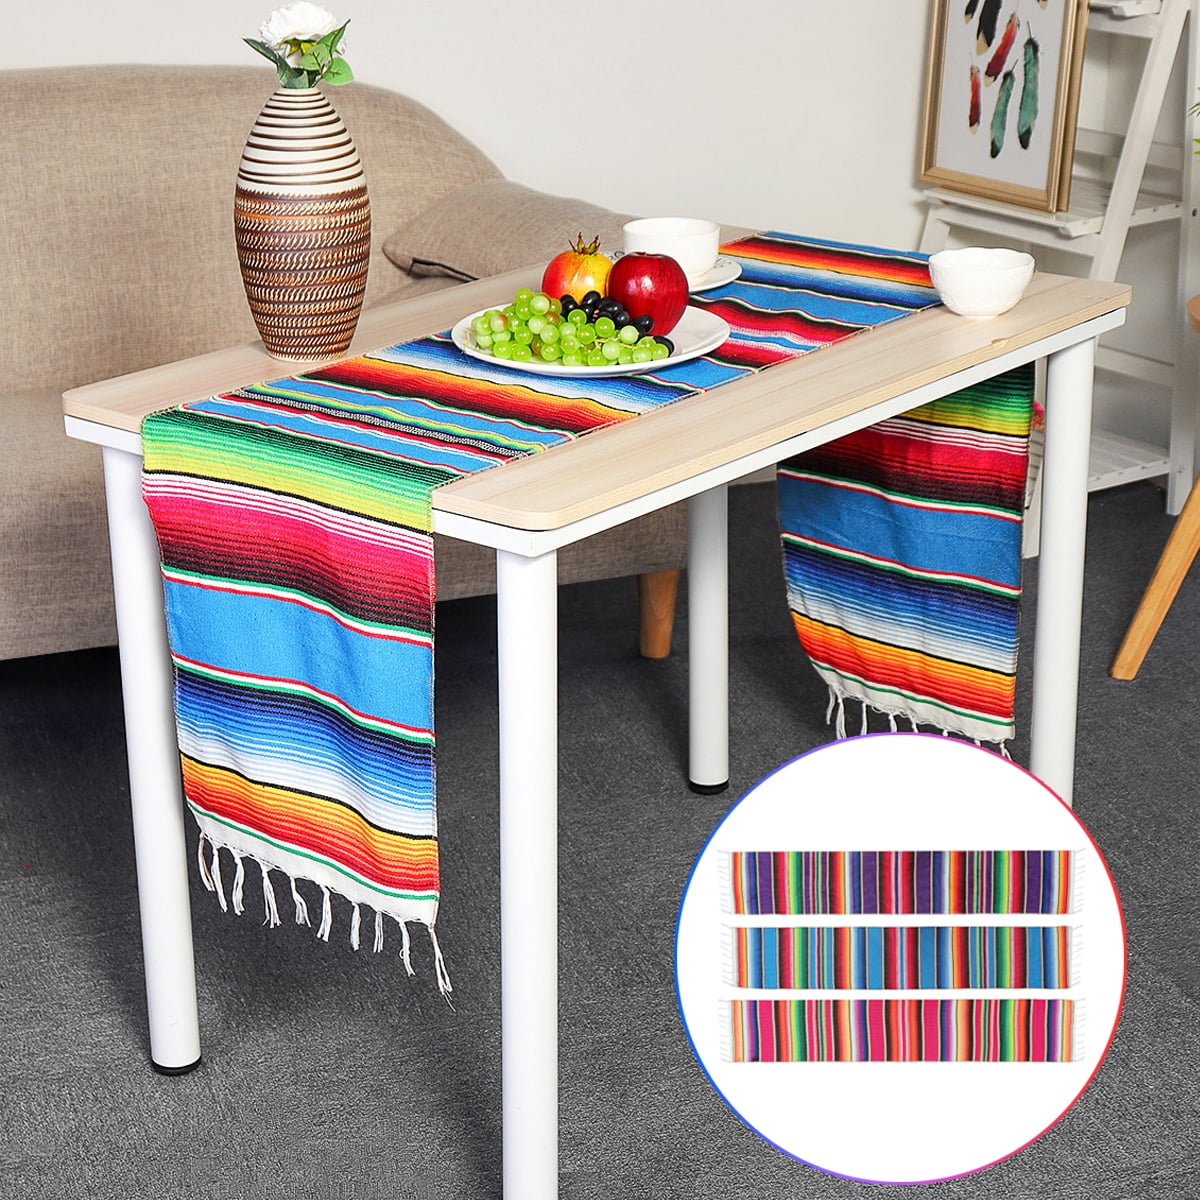 Hovico Mexican Table Runner 14 x 84 Inch Mexican Serape Table Runner Woven Table Runner for Mexican Party Wedding Decorations Outdoor Picnics Dining Table Birthday Parties Green 